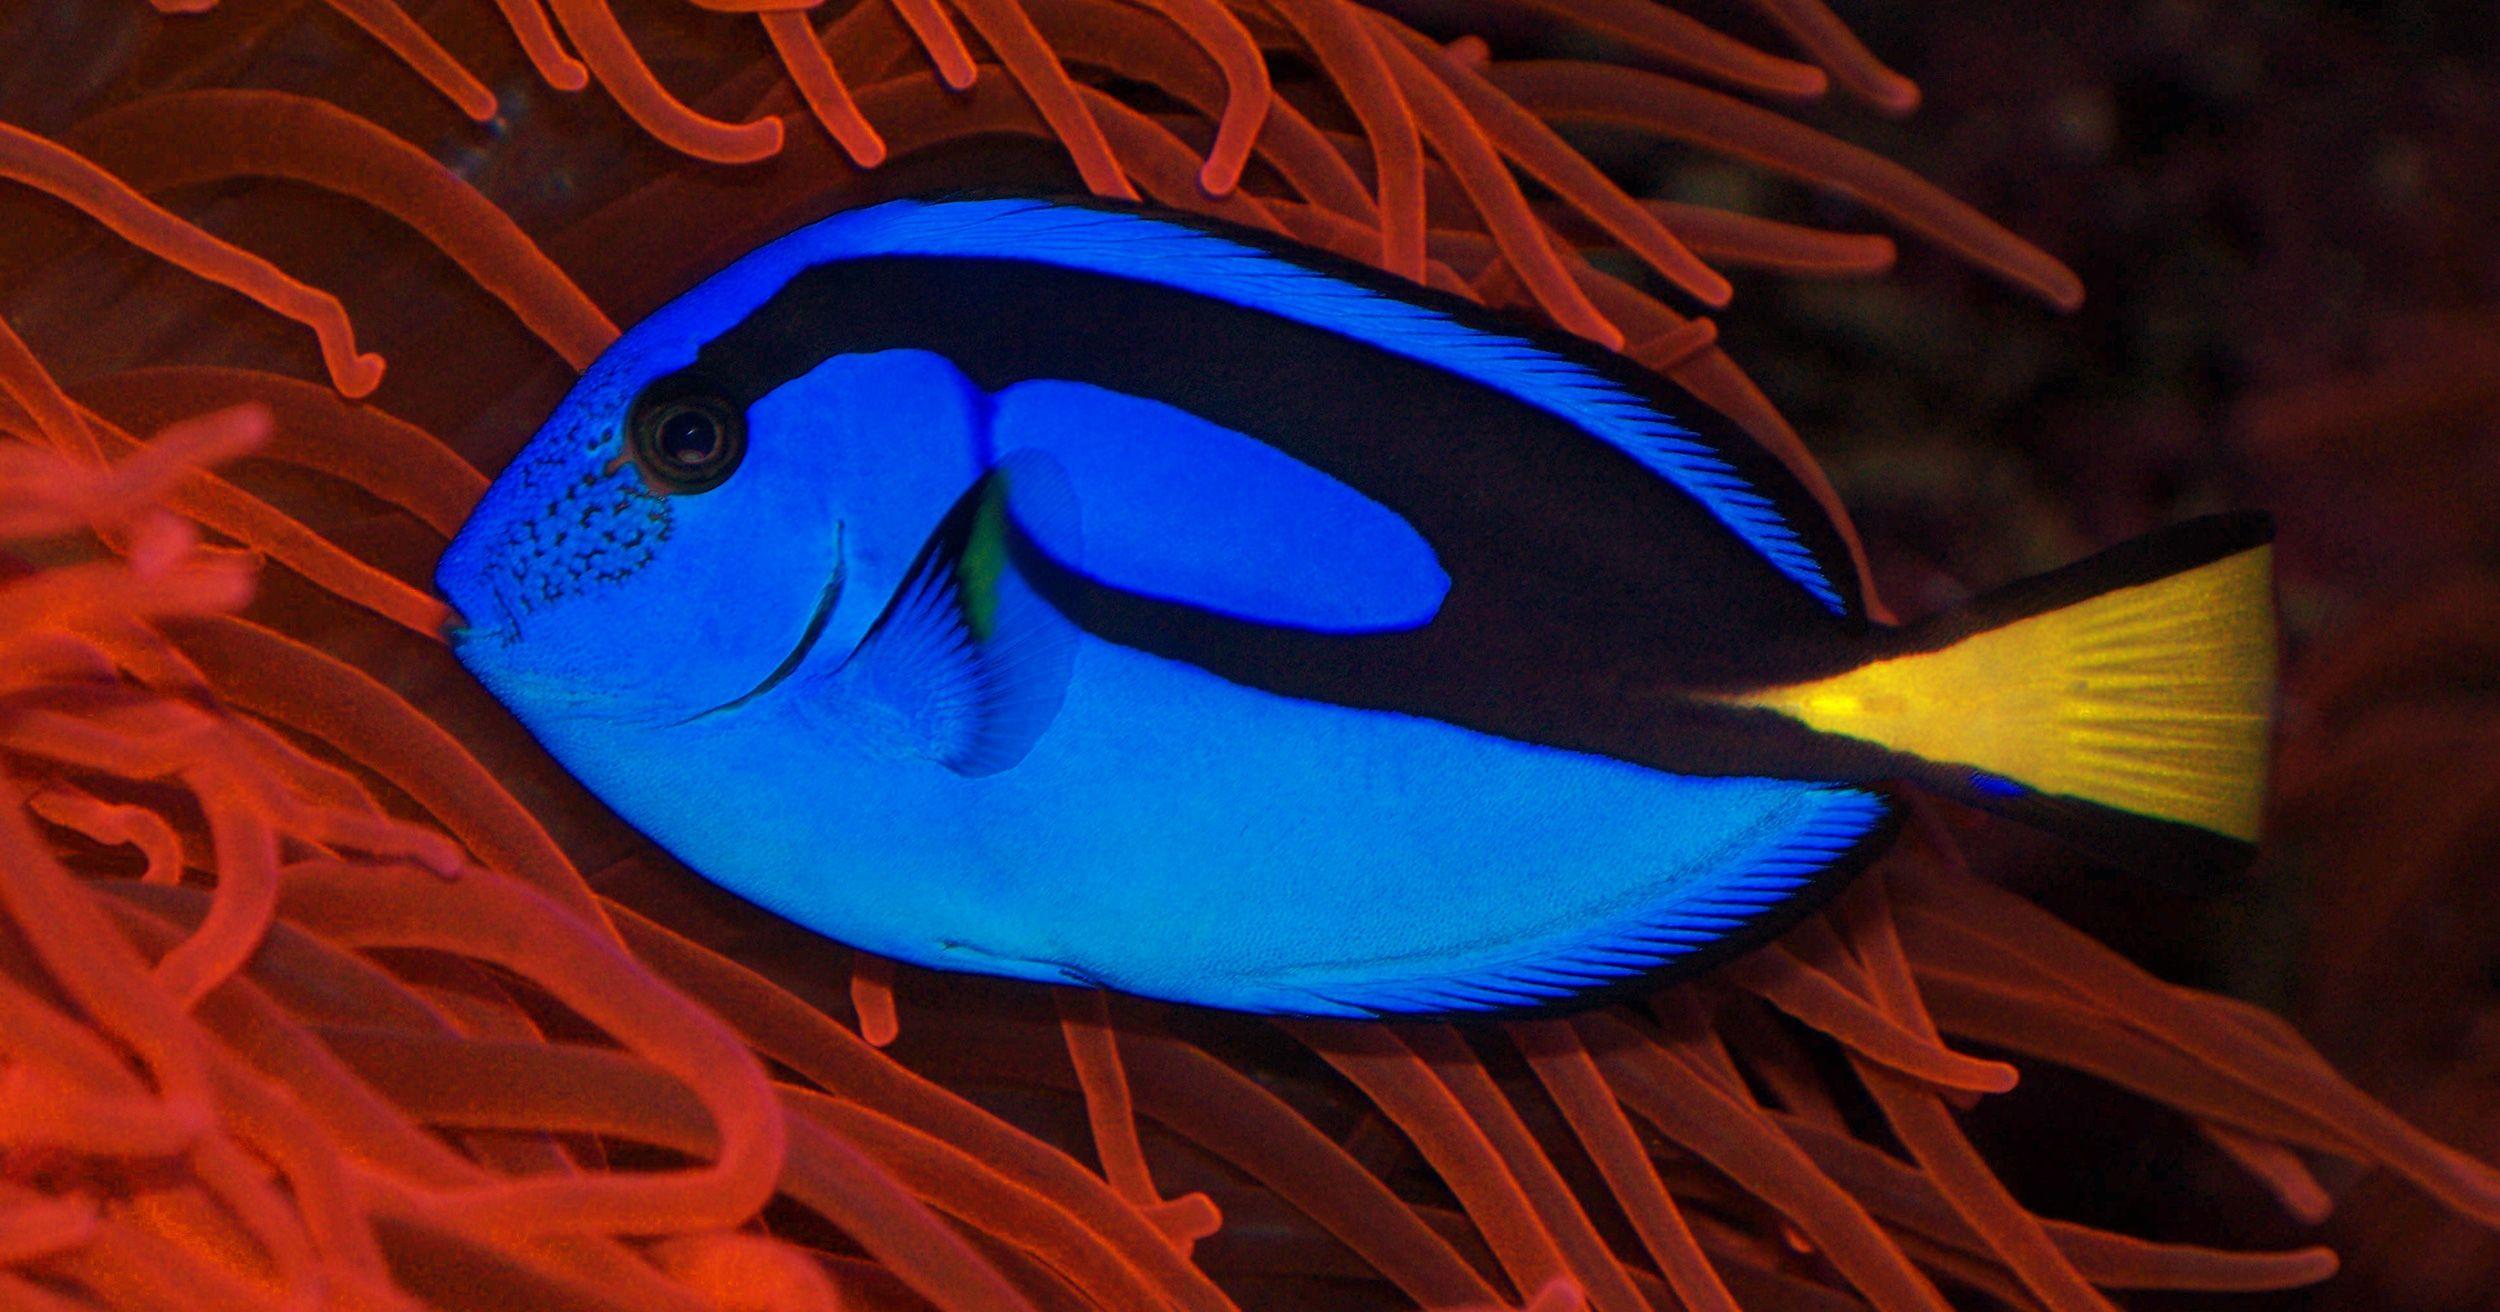 Blue and Gold Fish Wallpaper 2500x1312